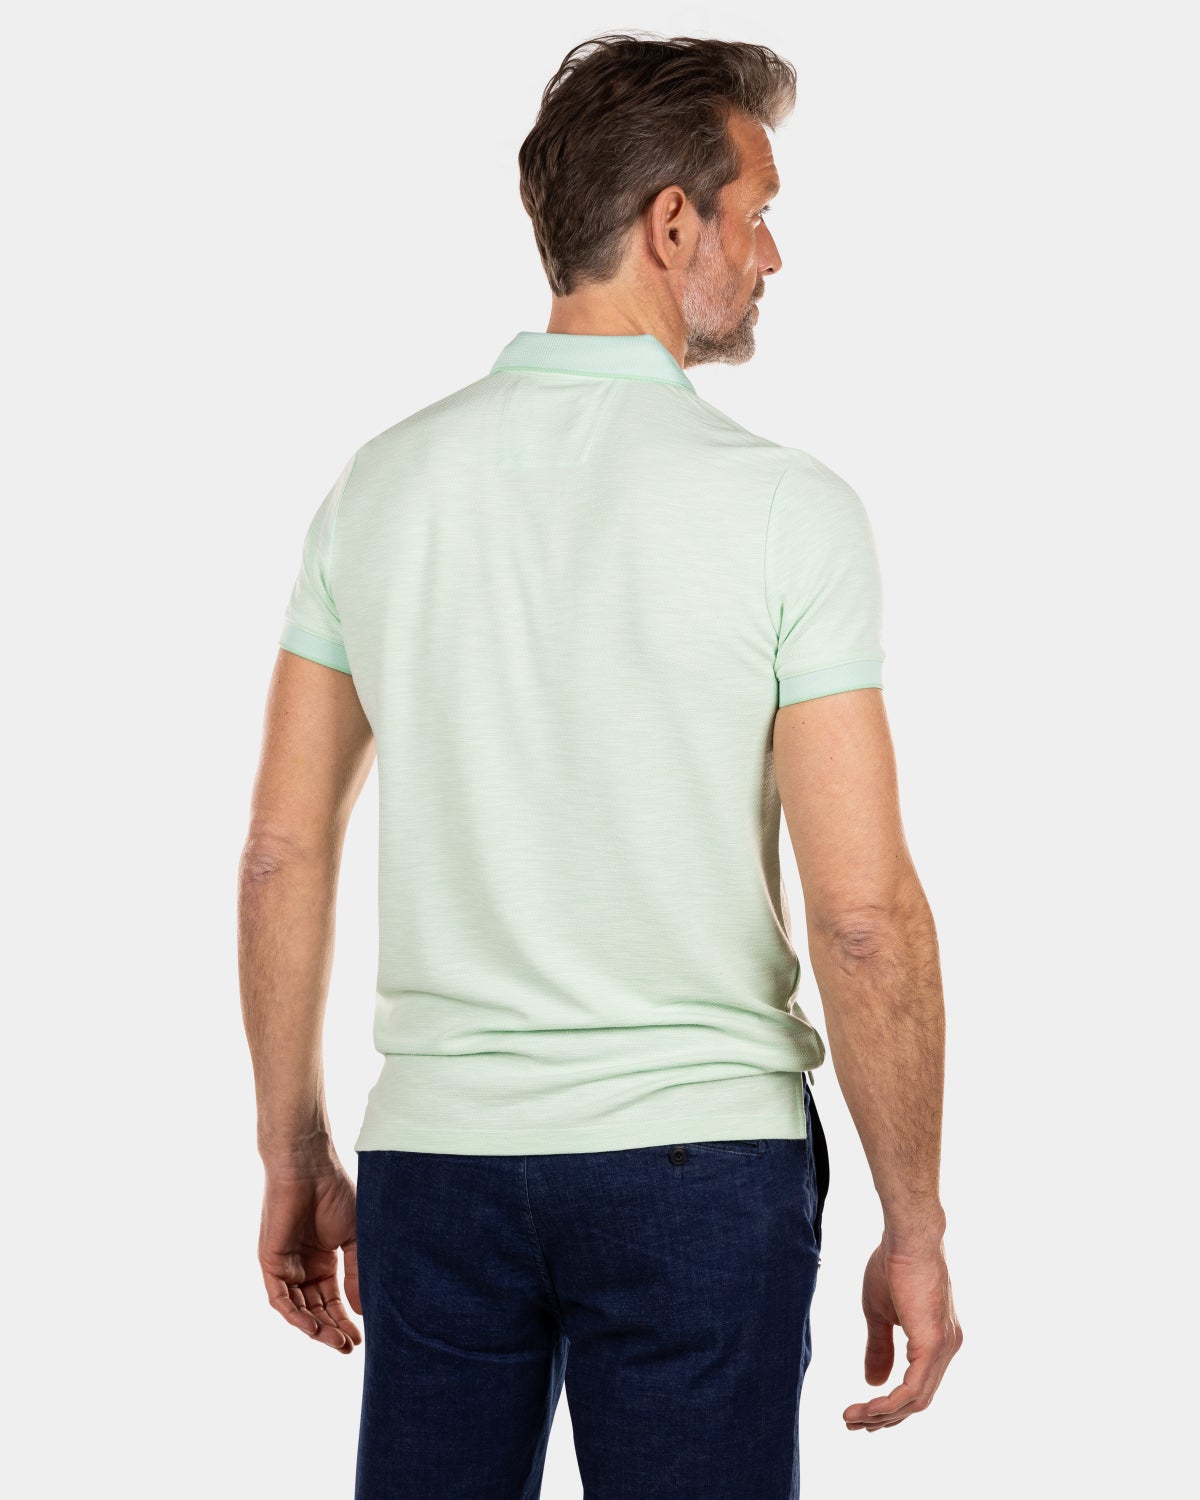 Plain polo made of durable material - Teal Green